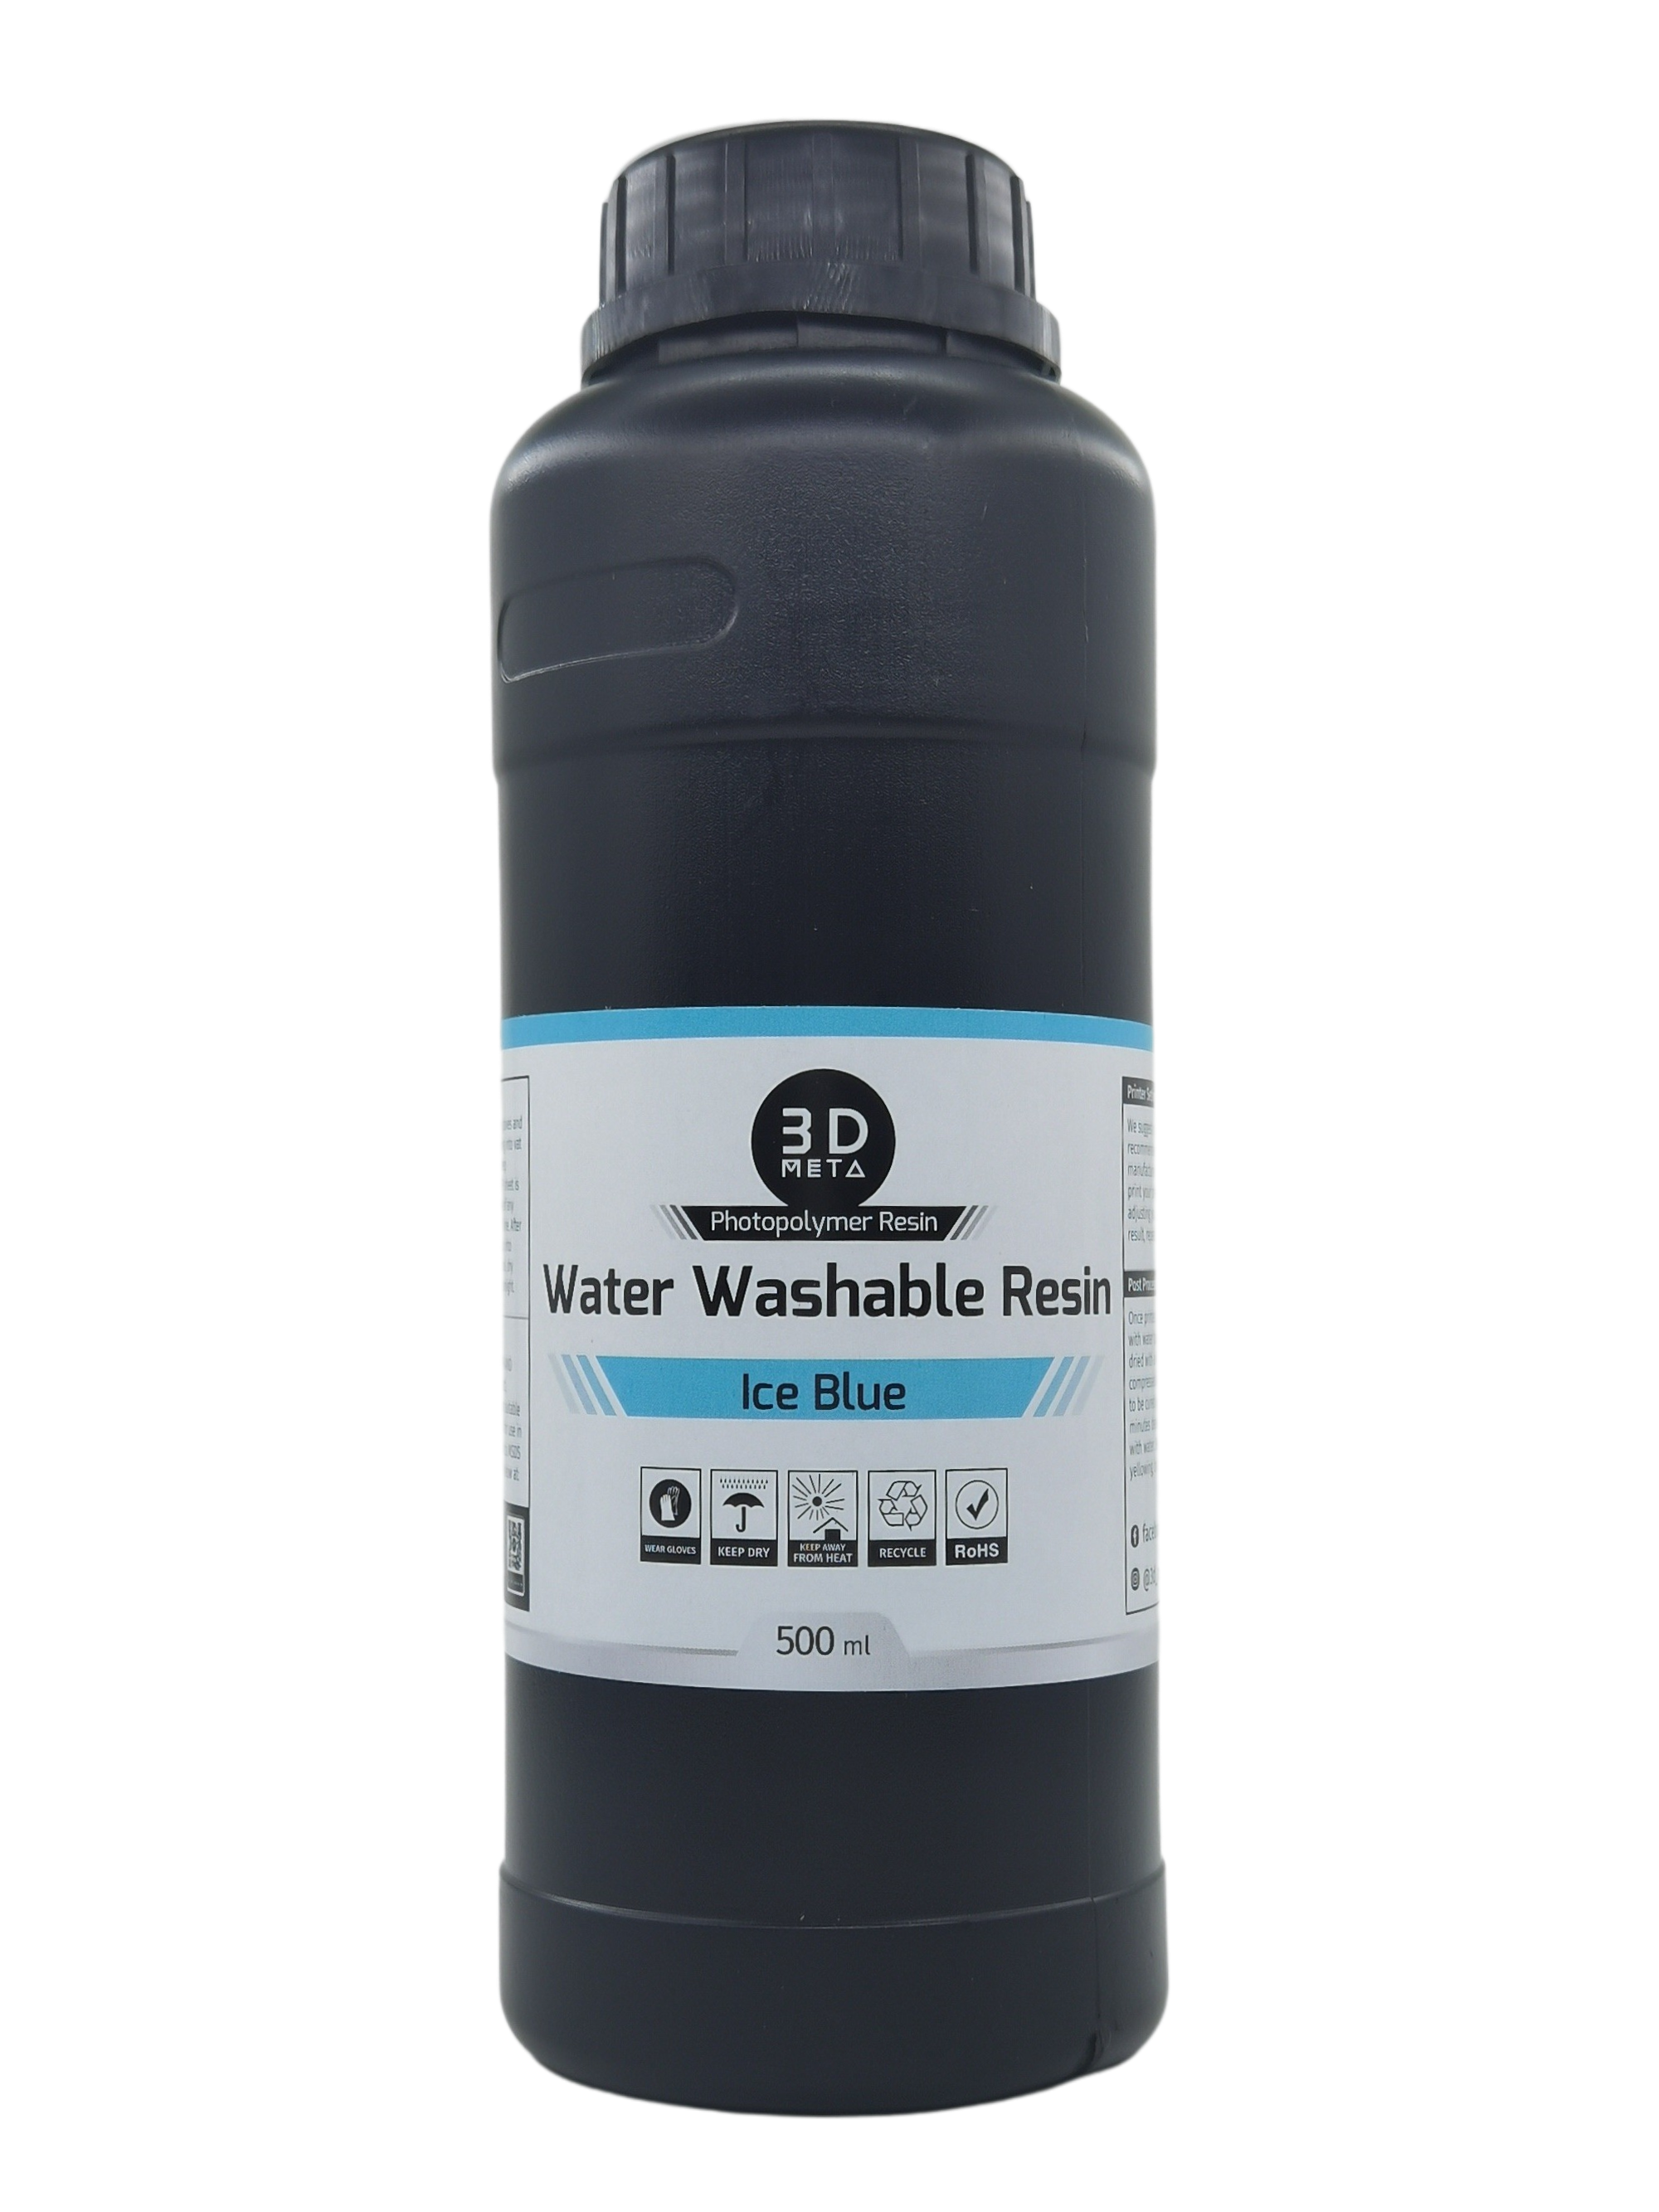 Water Washable Resin.